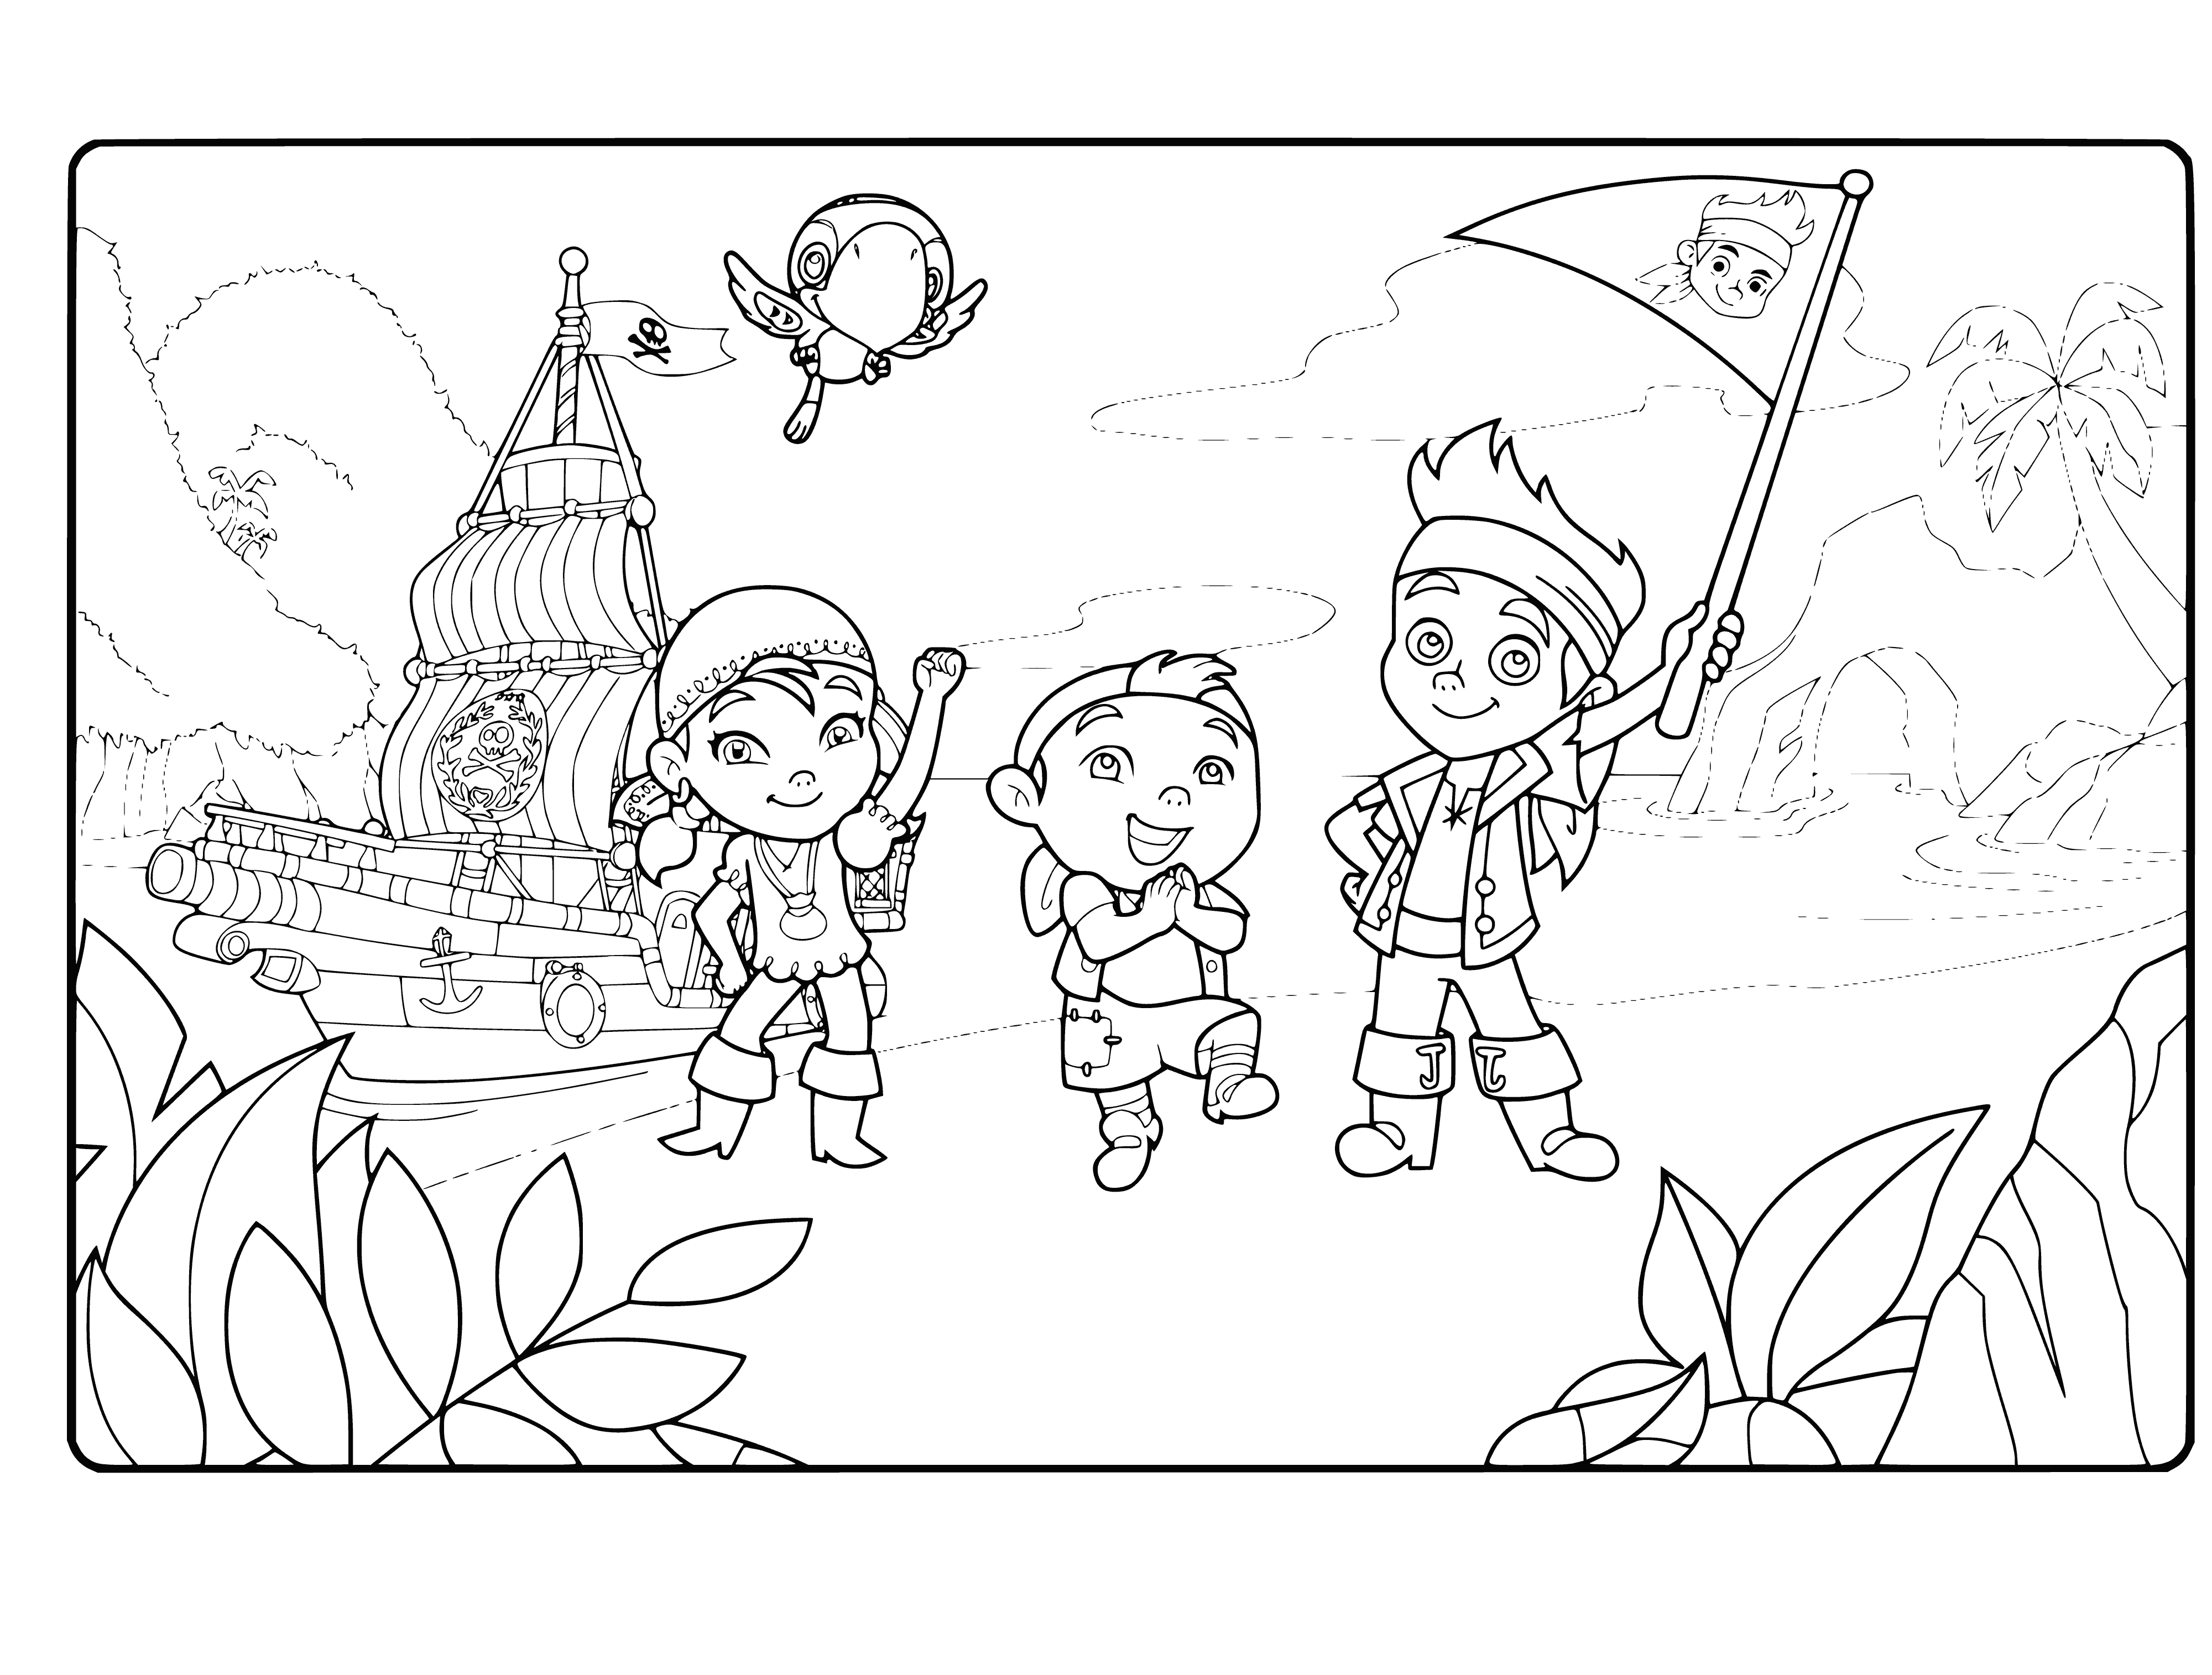 Jake's crew and the ship coloring page